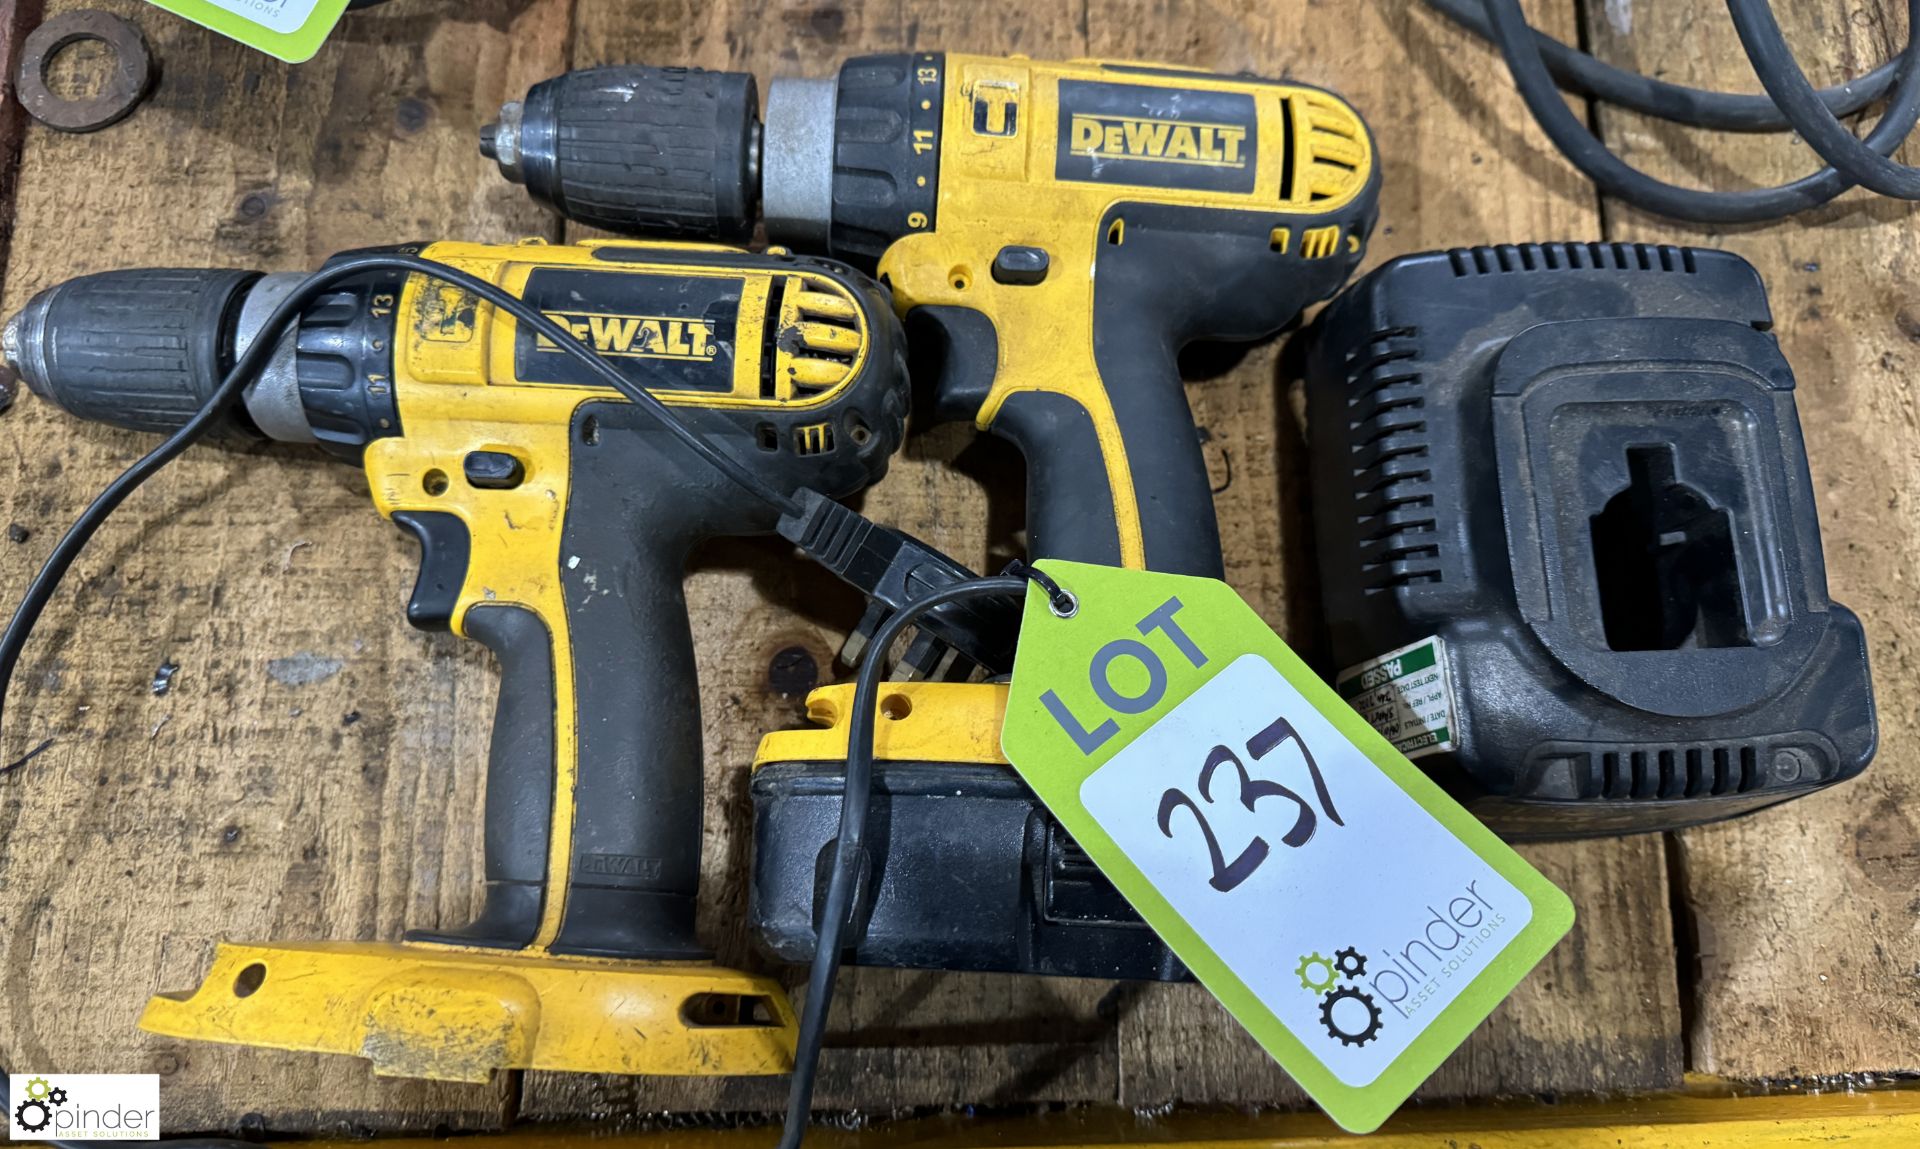 2 Dewalt Rechargeable Drills, with battery charger (one battery only)